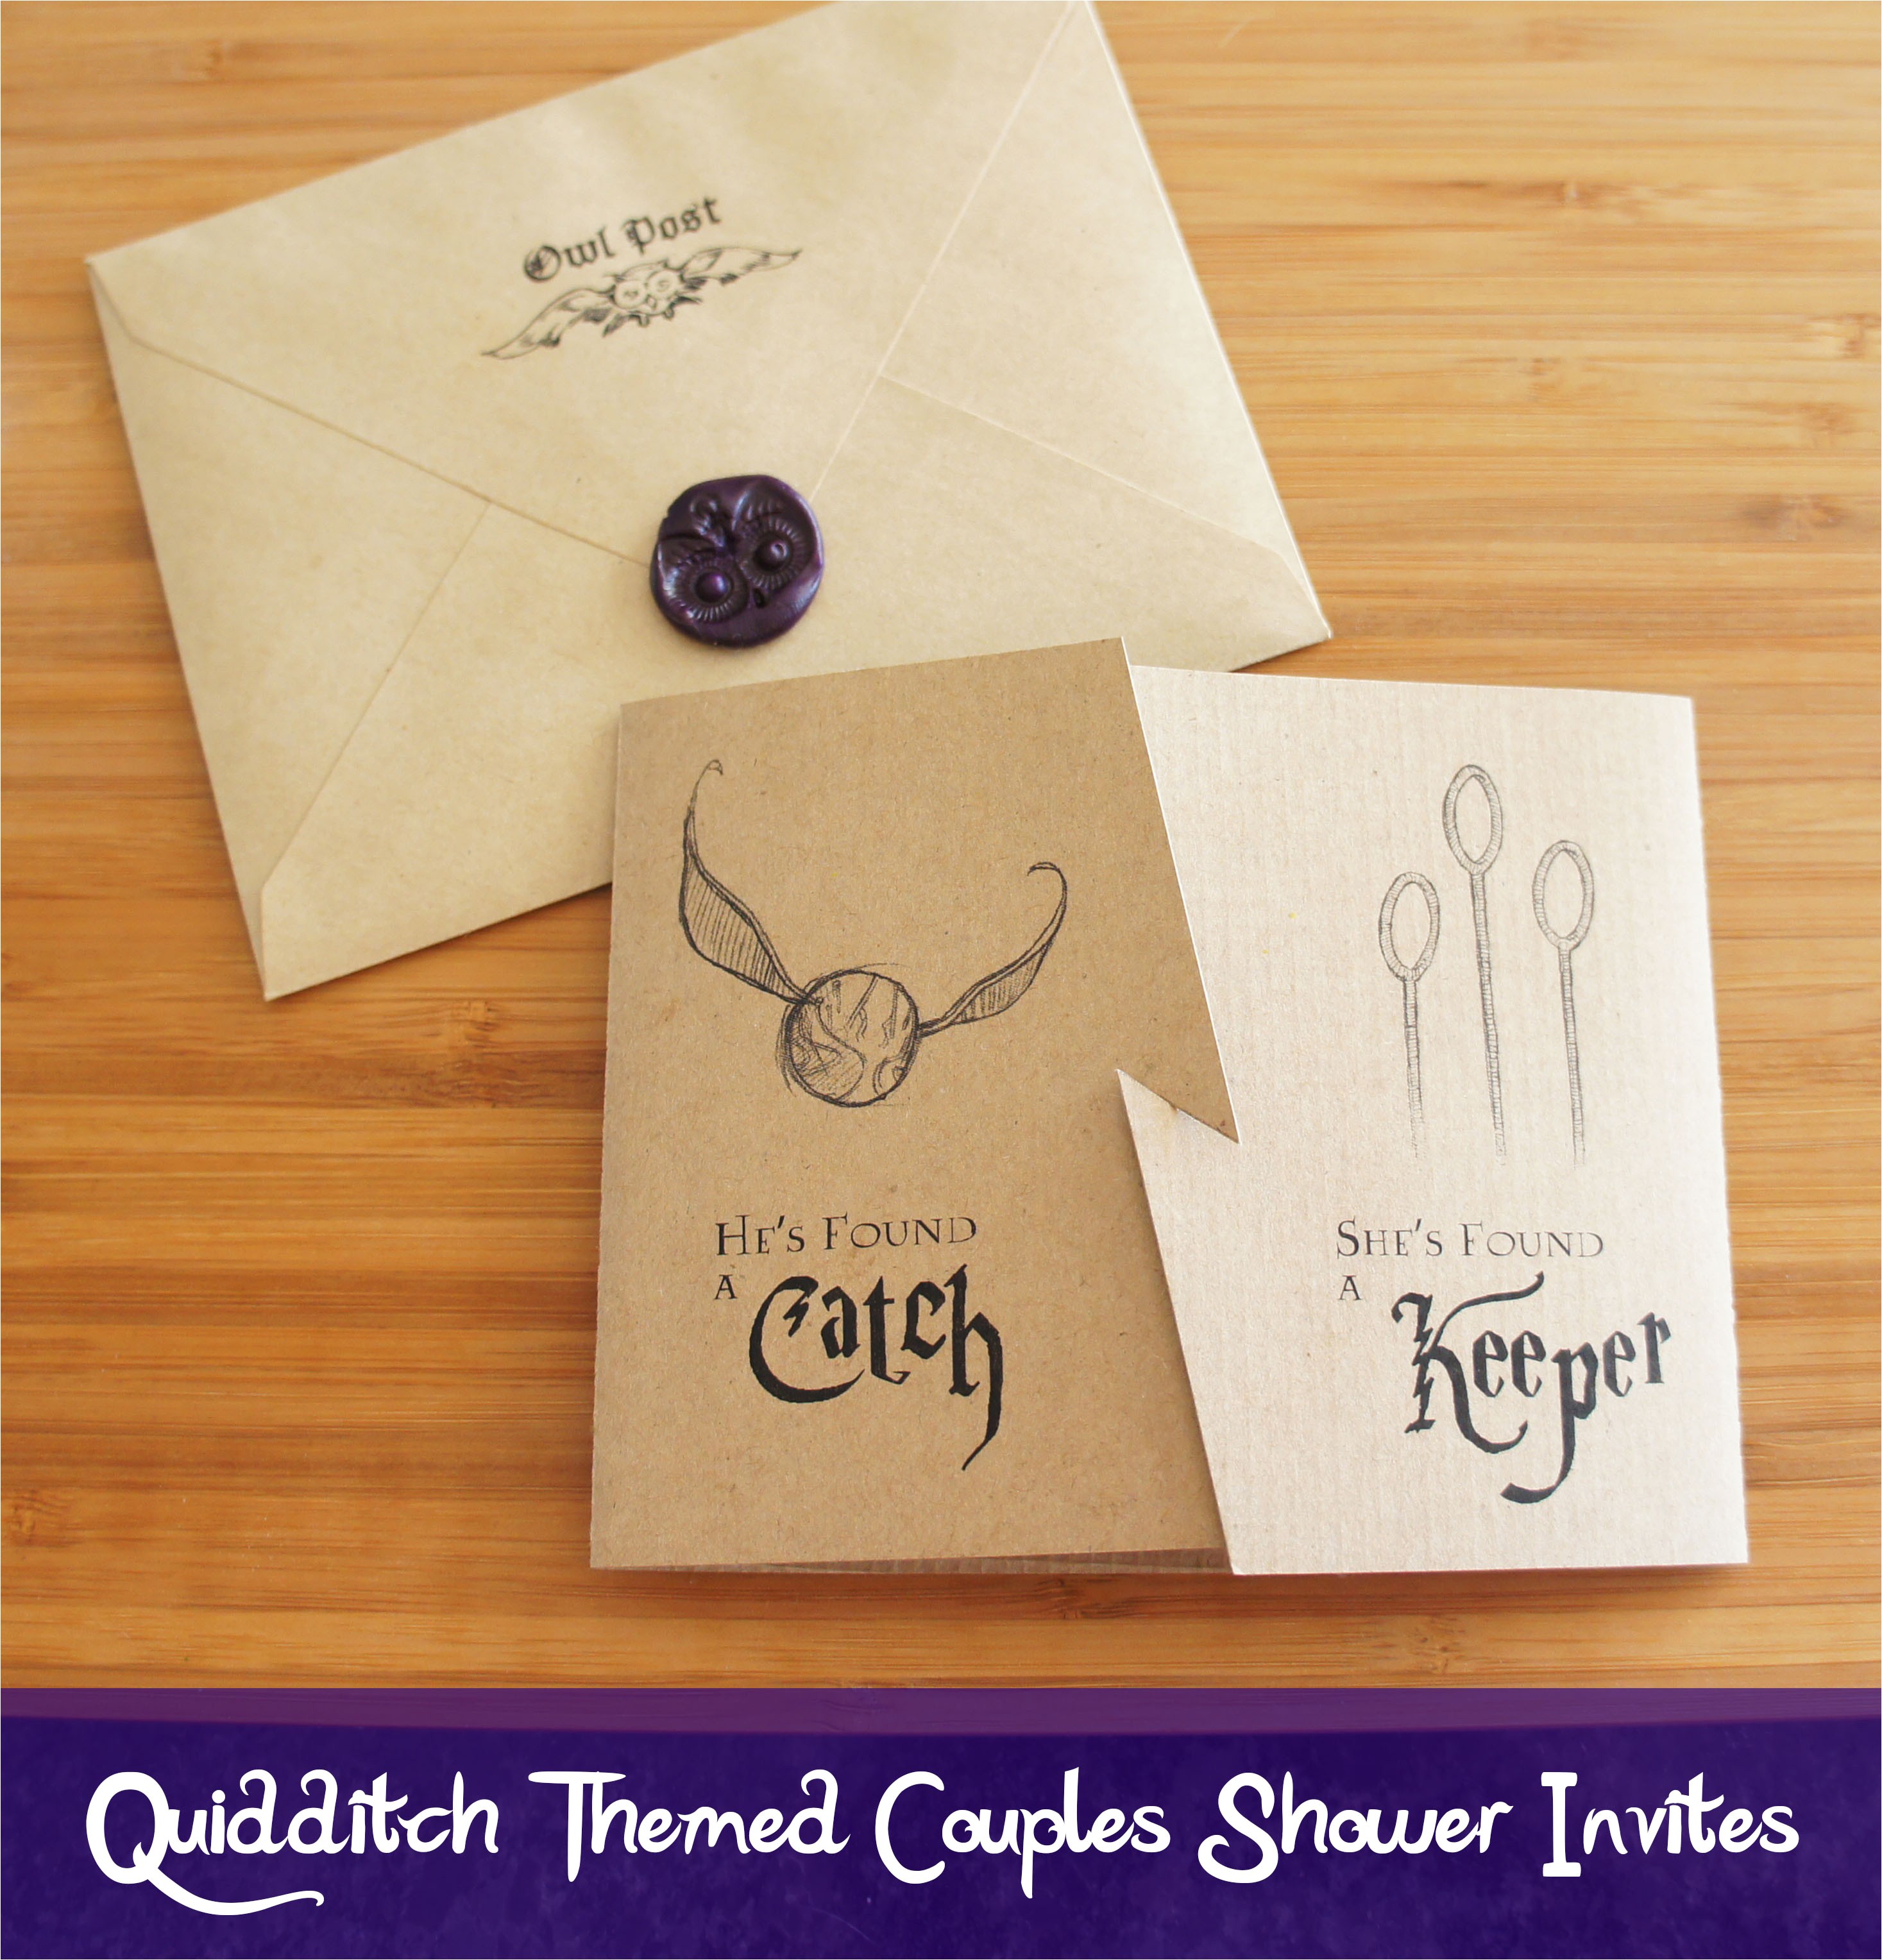 quidditch inspired invites for a harry potter themed couples shower